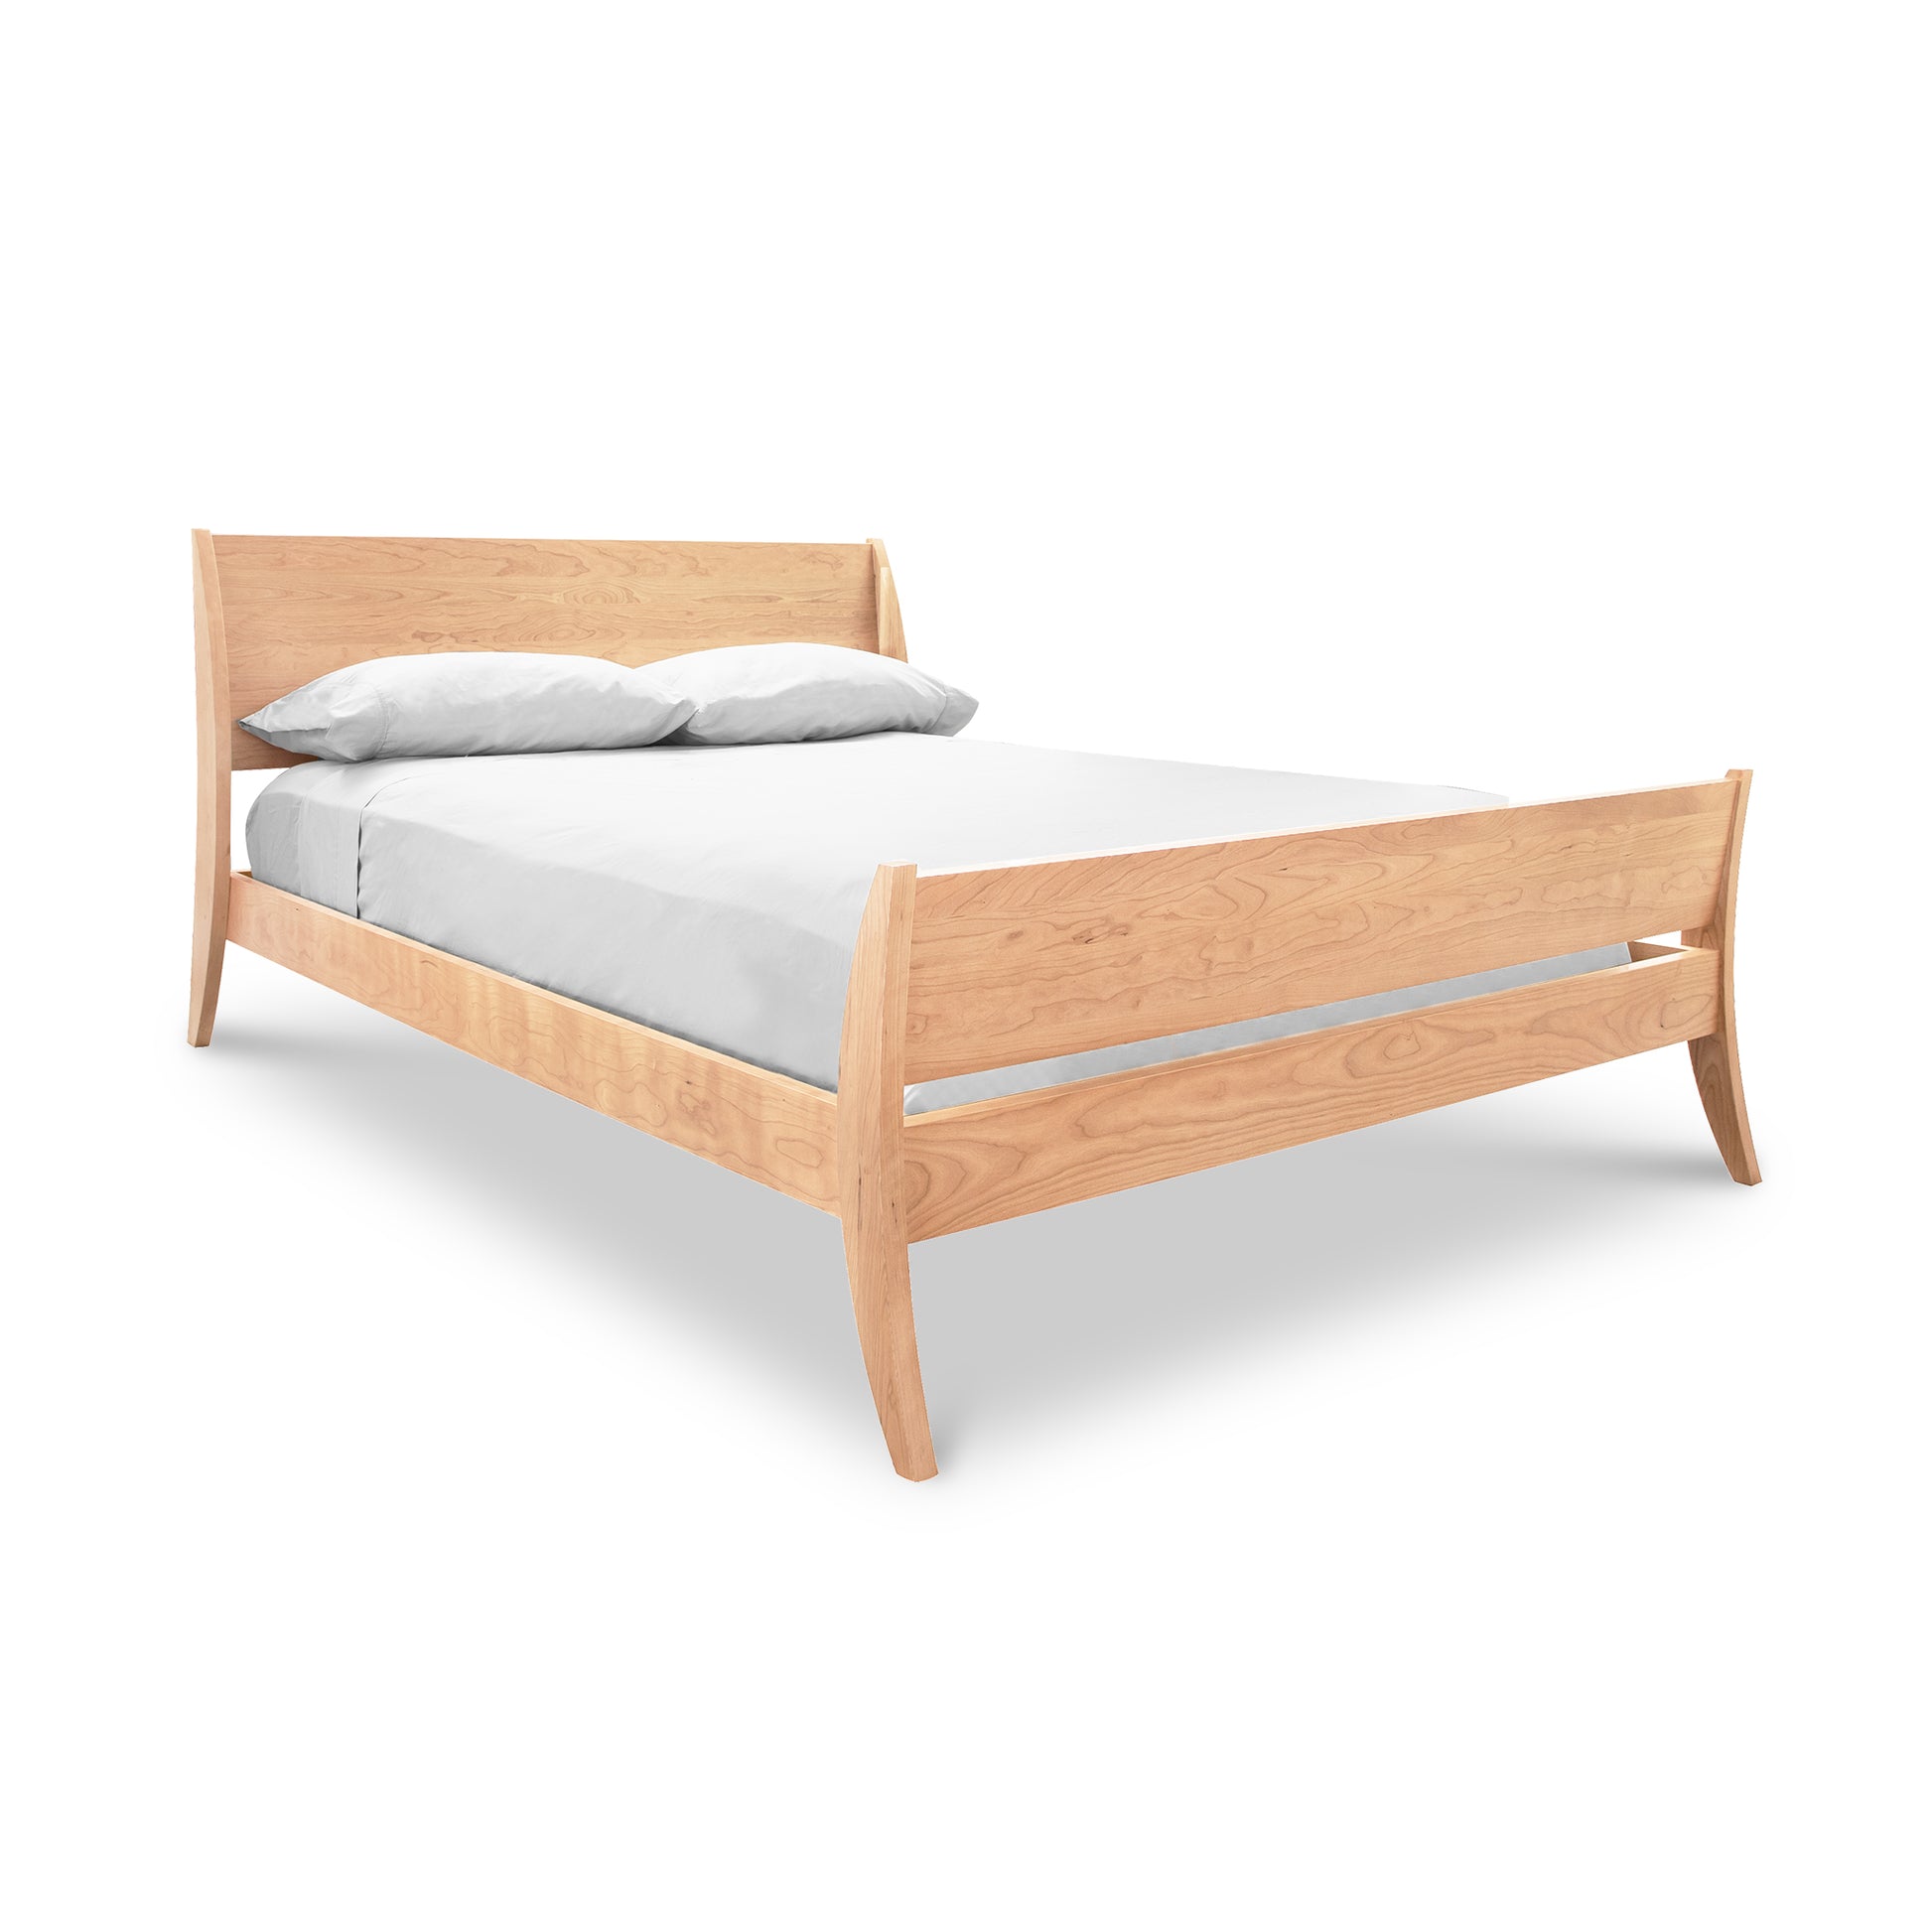 The Lyndon Furniture Holland Sleigh Bed, an elegant bedroom centerpiece, features a contemporary twist with a white sheet adorning its wooden frame.